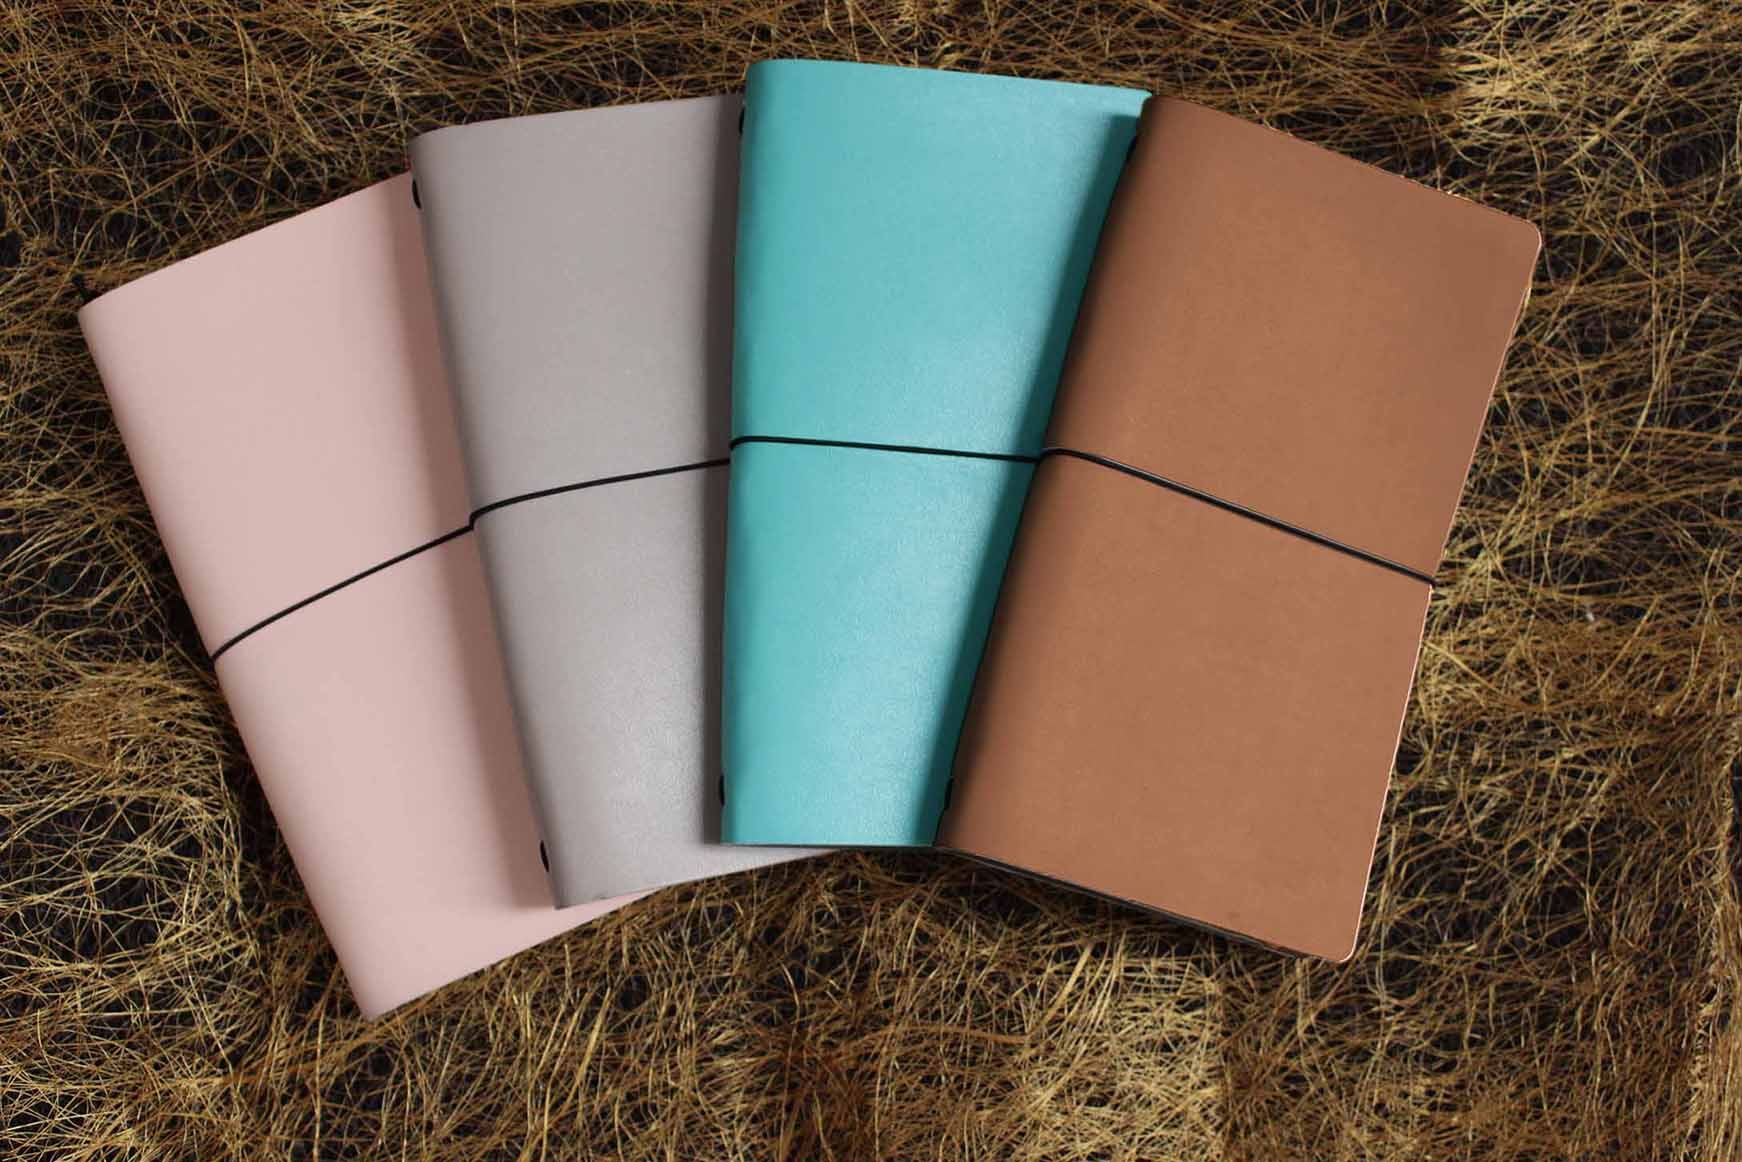 Quest Journals (each costs P680 and comes in Talc Pink, Cool Taupe, Teal, and Bronze)  